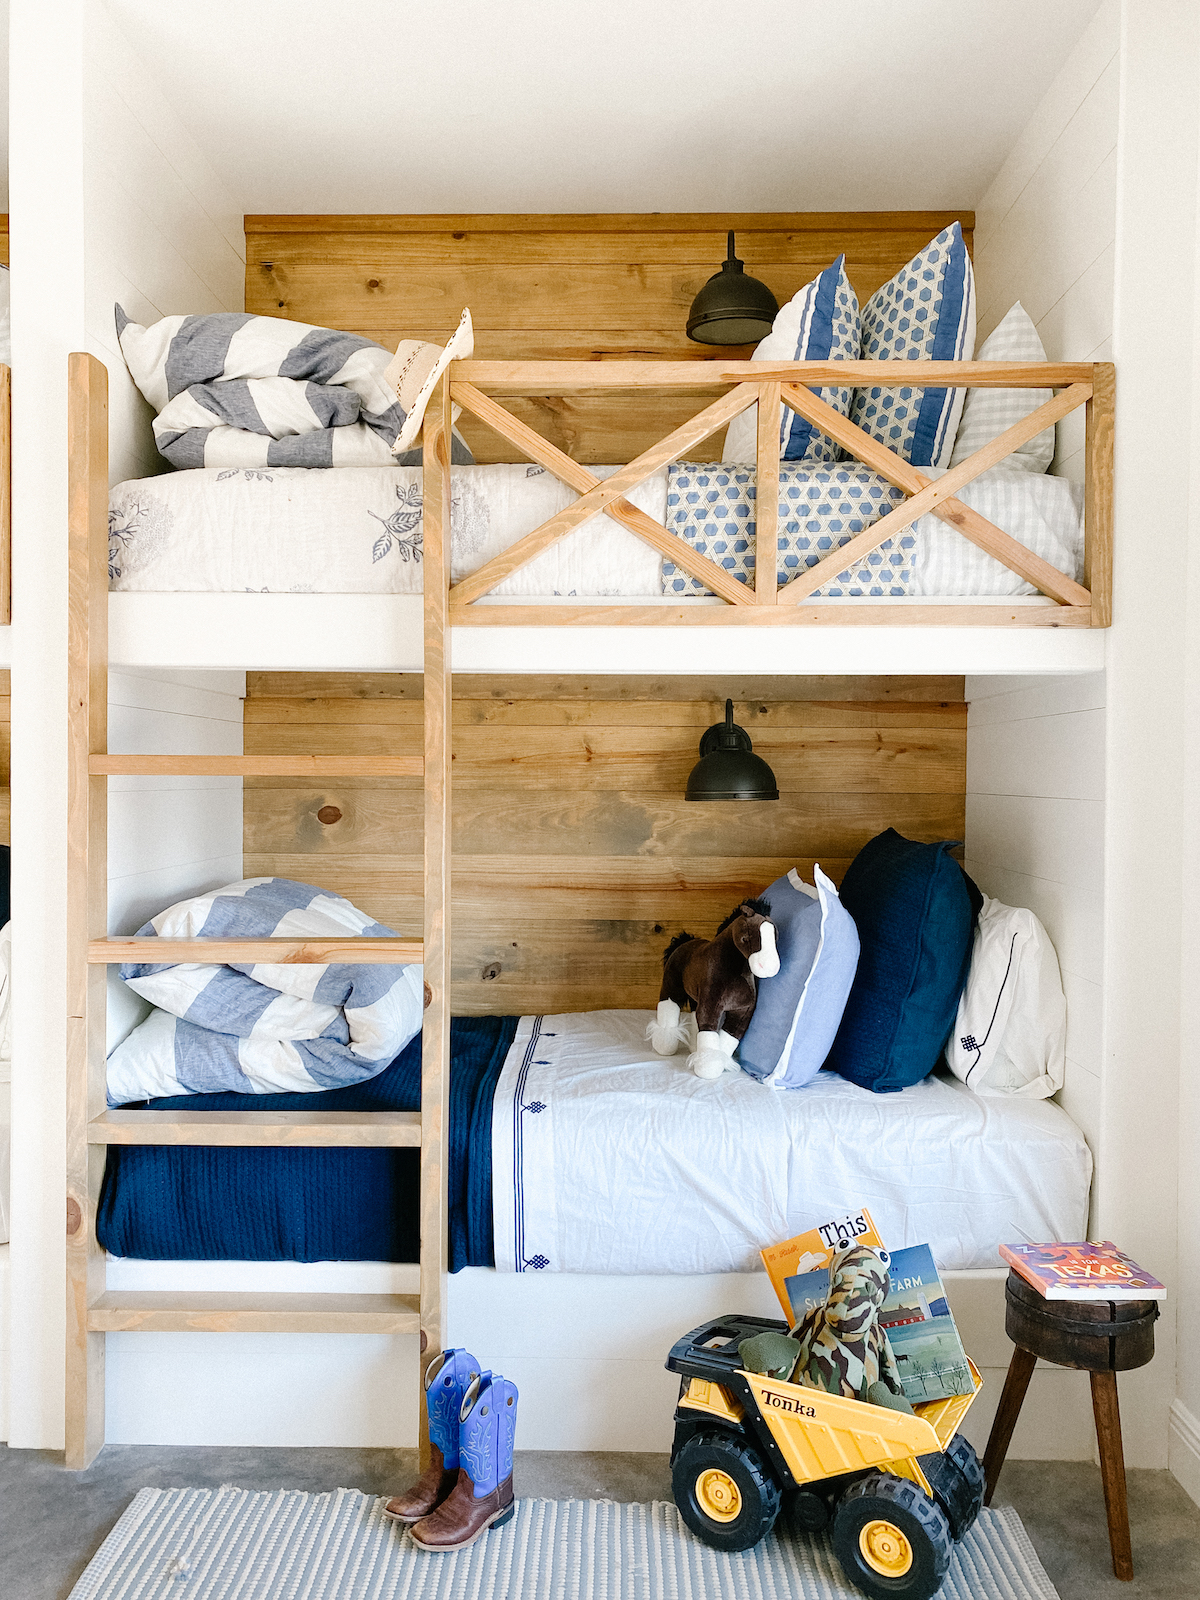 Harper Ranch Bunk Room Reveal from House of Harper